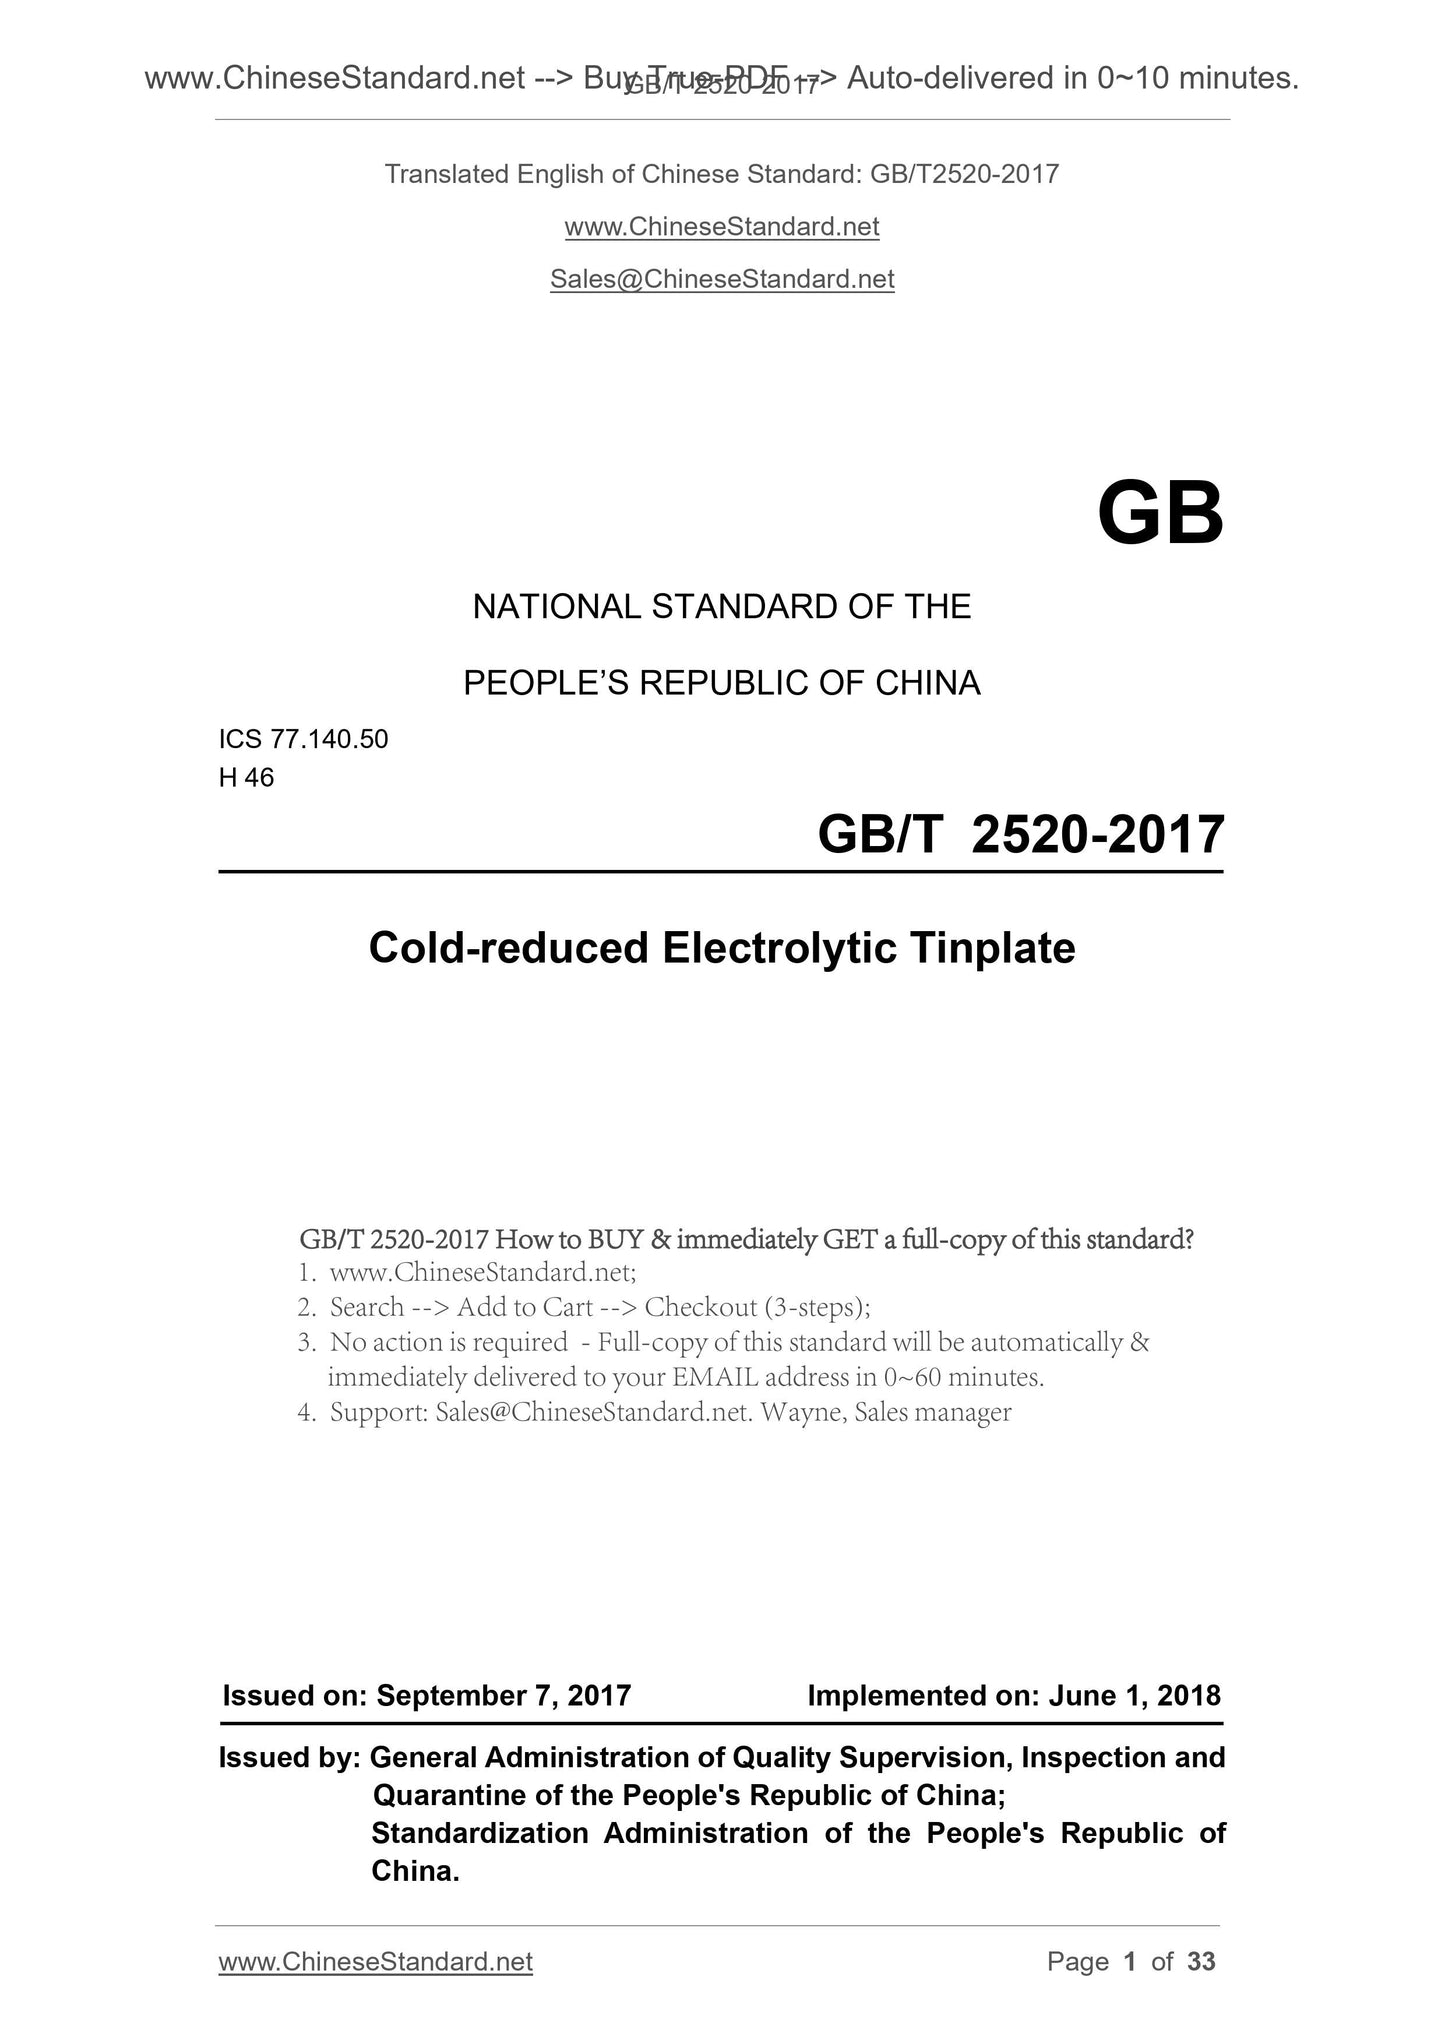 GB/T 2520-2017 Page 1